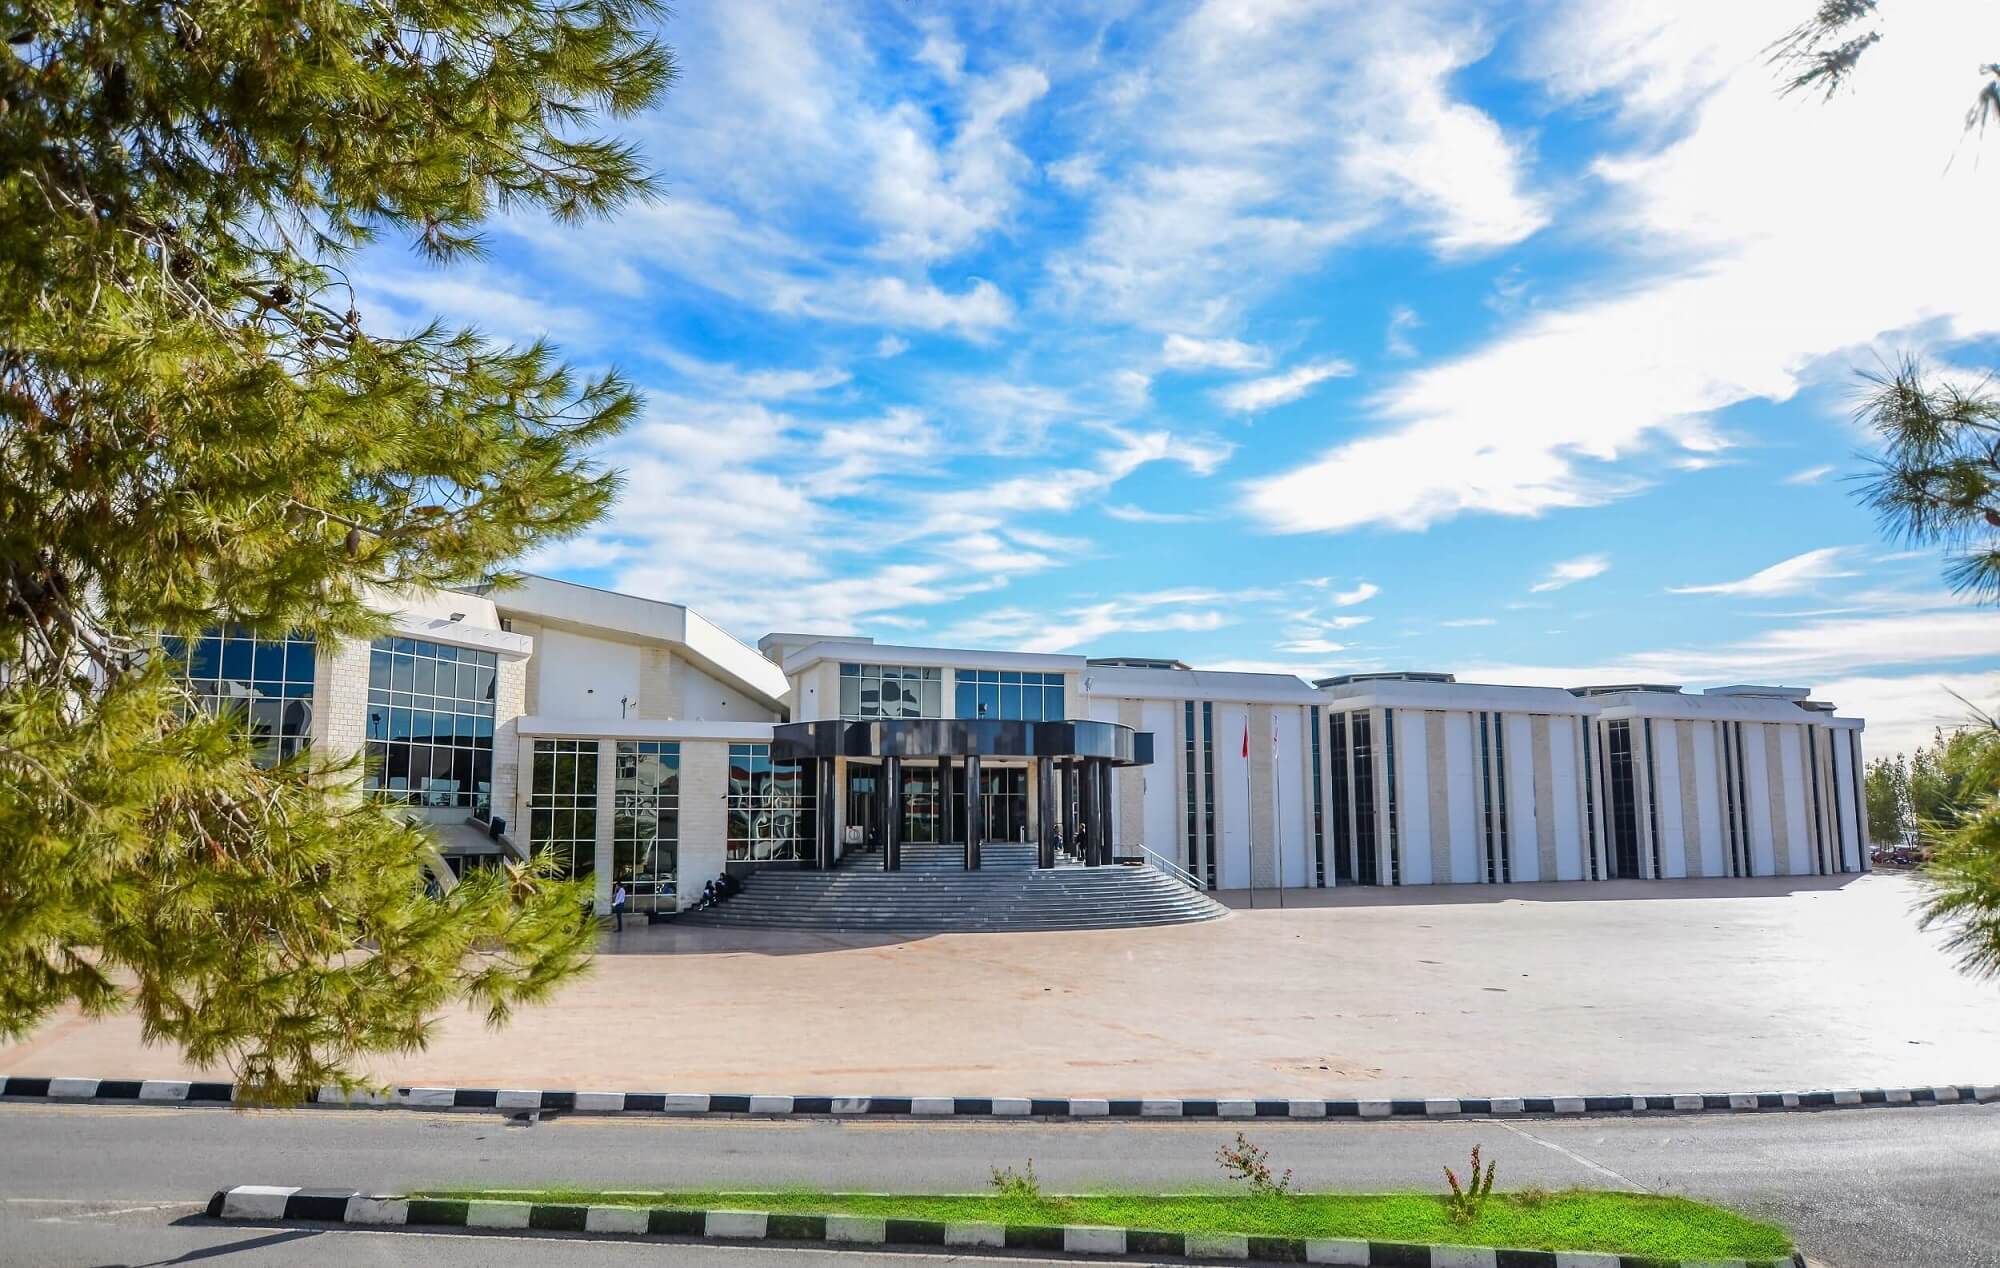 Near East University, University of Kyrenia and Yeniboğaziçi Campus Grand Libraries, where knowledge, culture and art meet, open the doors of a limitless world to their users.